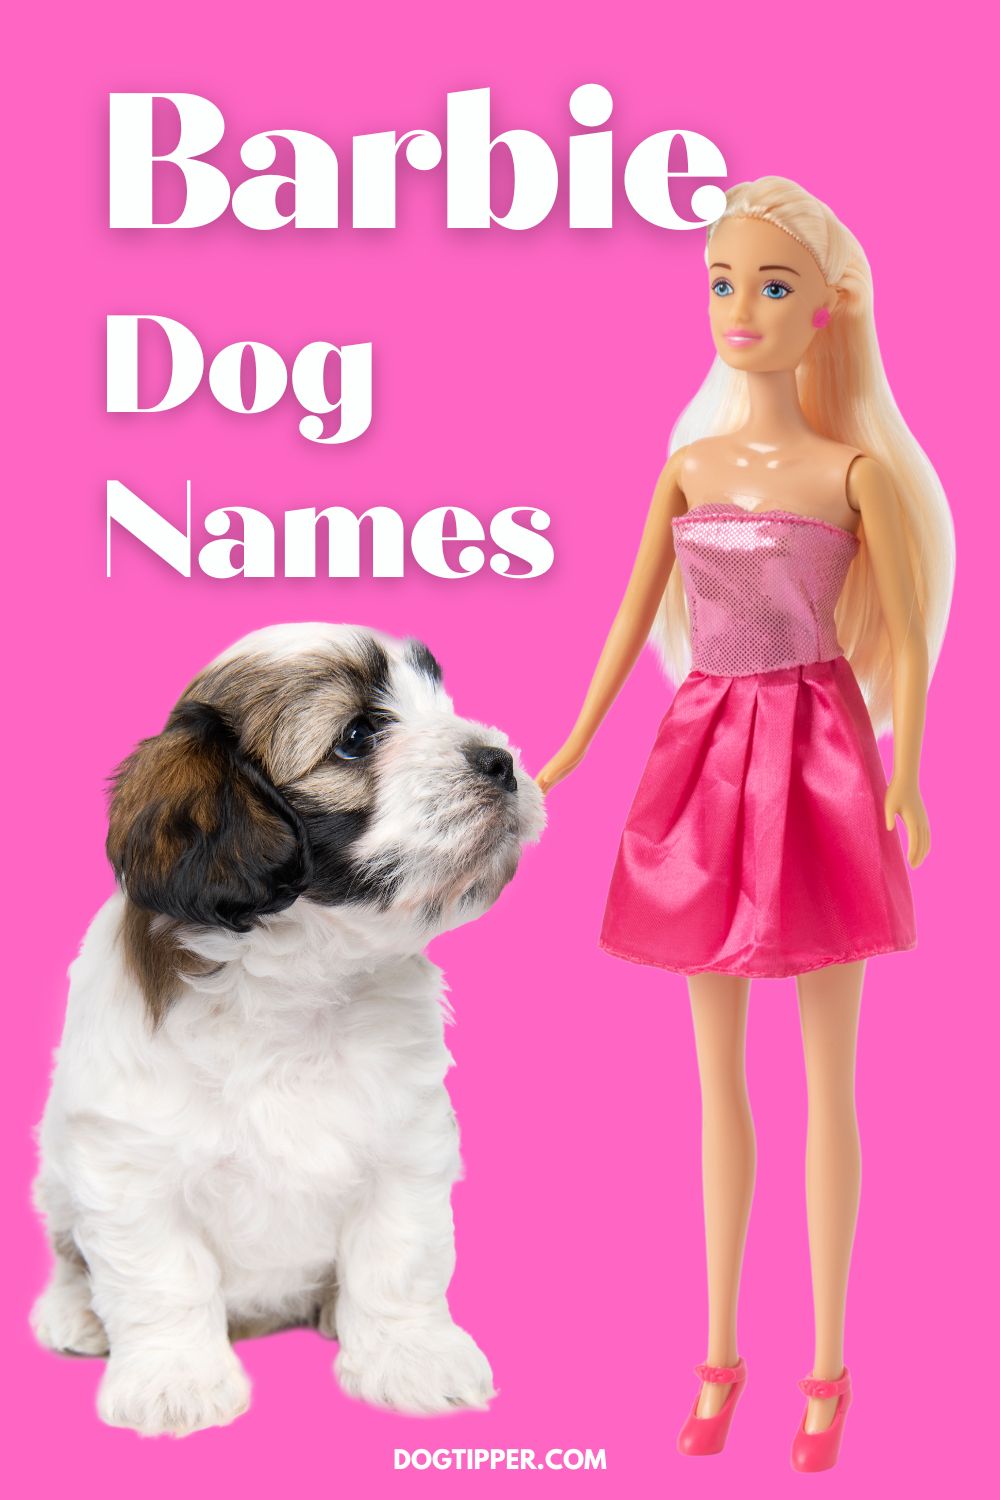 Barbie dog name for your new puppy